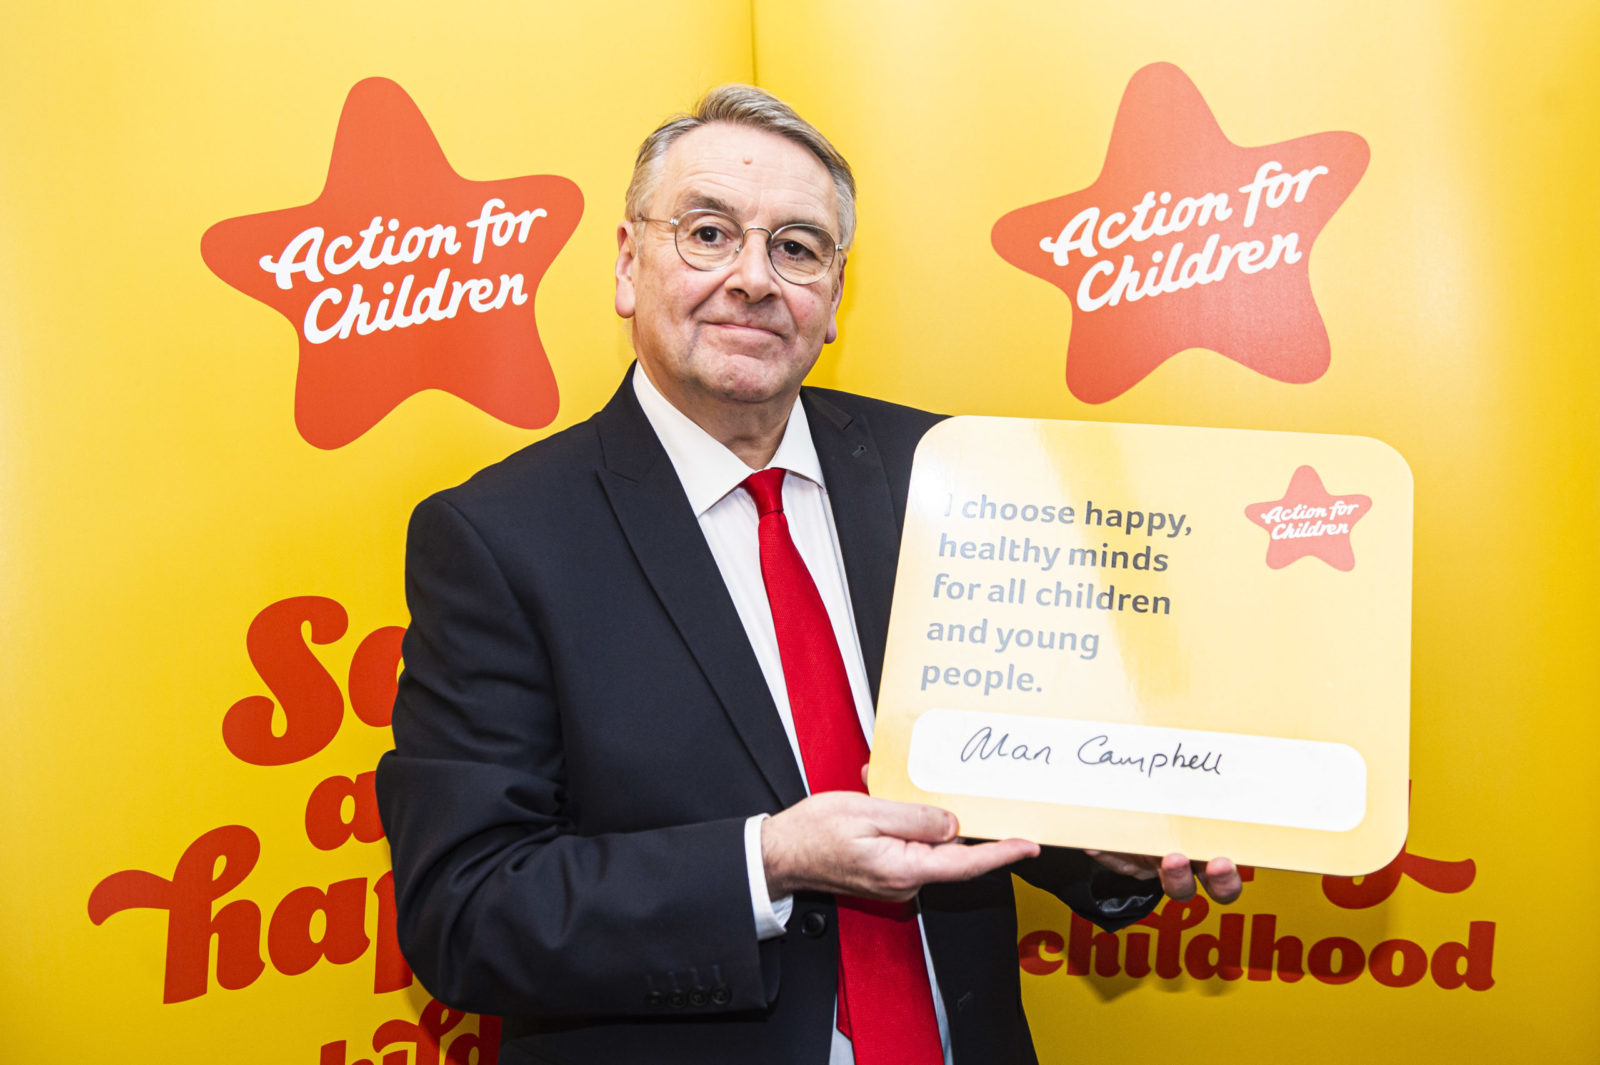 Alan Campbell at Action for Children Event